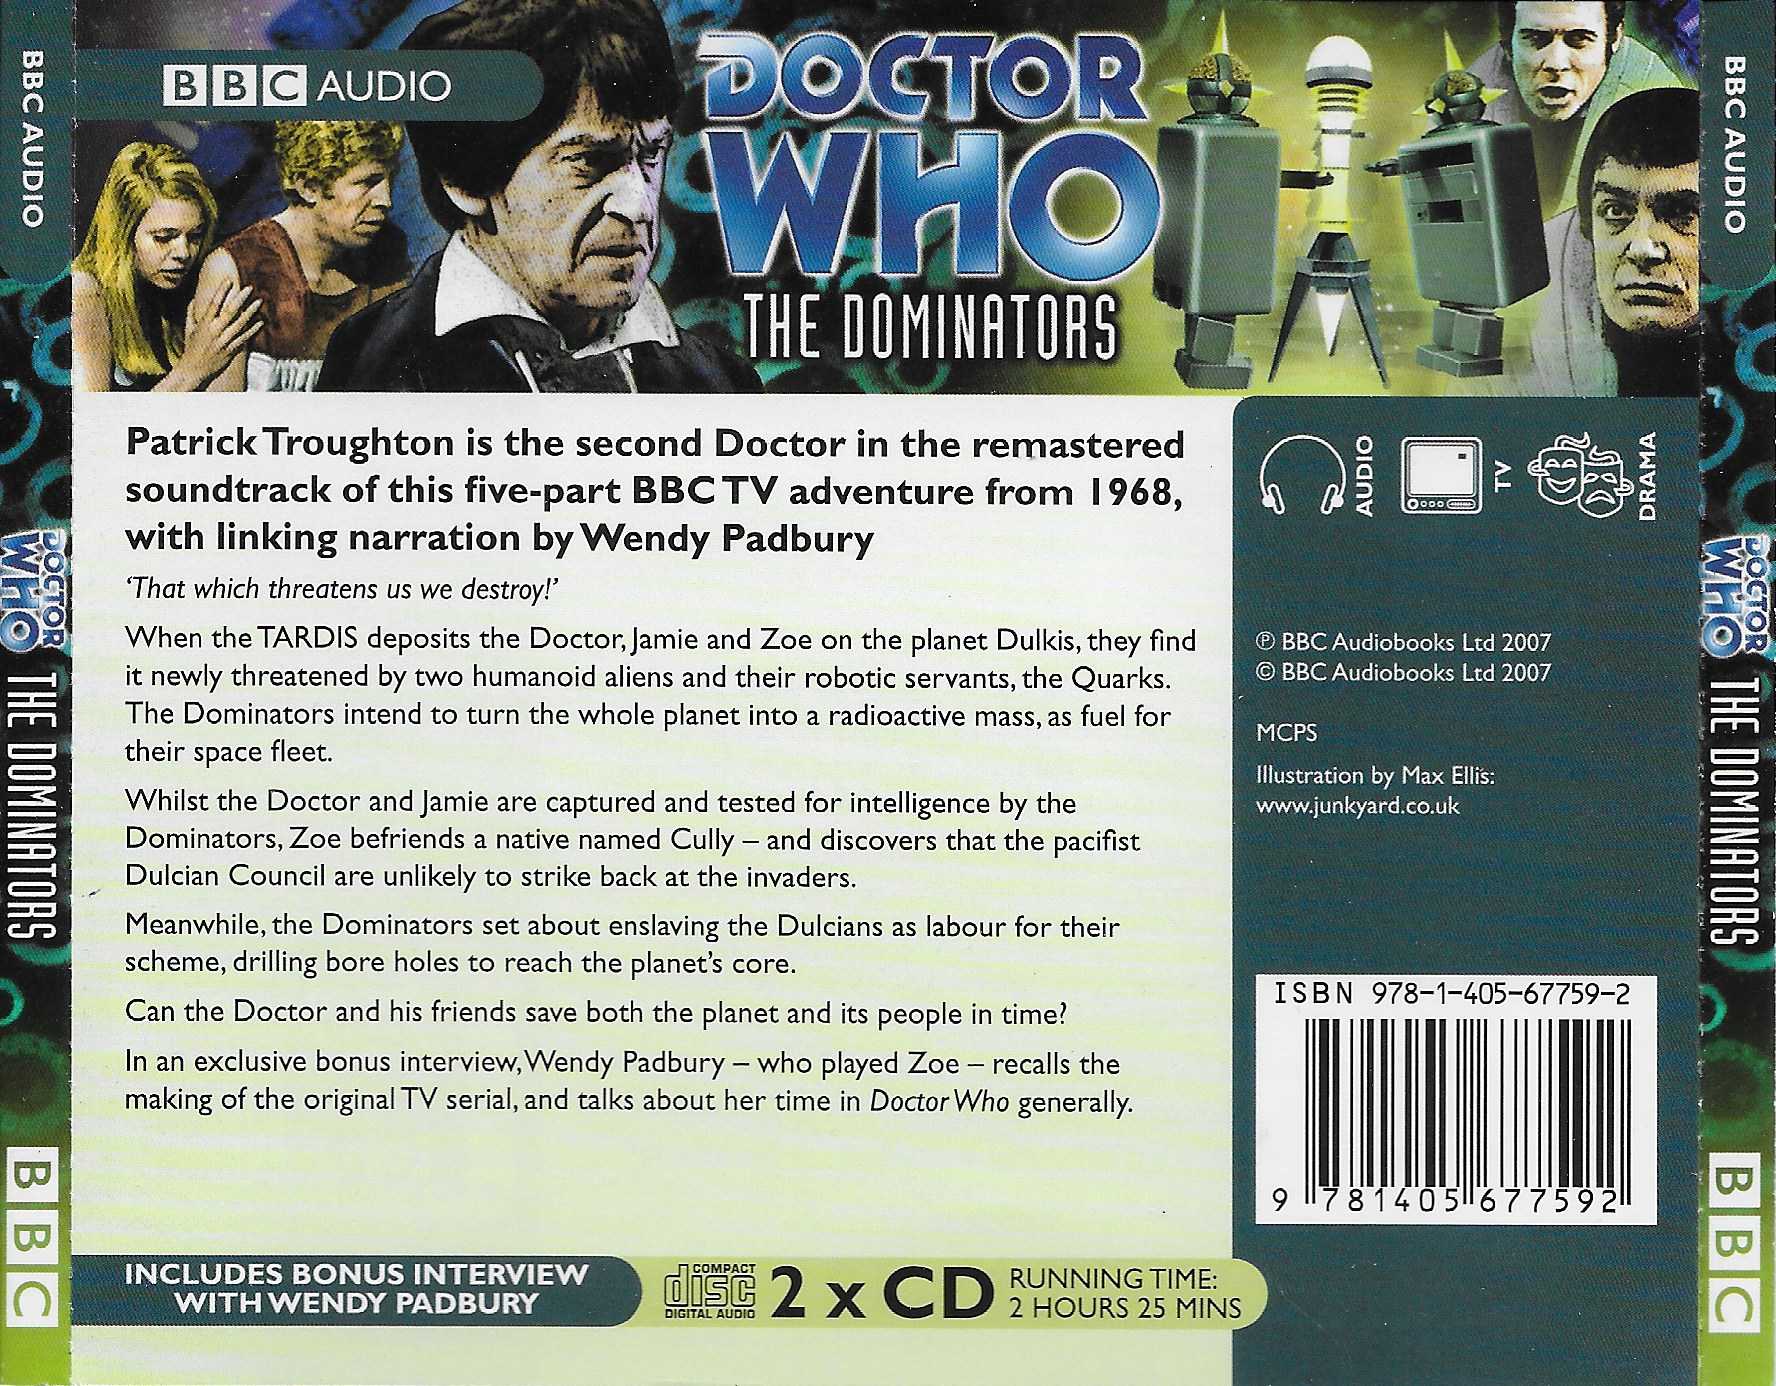 Picture of ISBN 978-1-405-67759-2 Doctor Who - The Dominators by artist Norman Ashby (Mervyn Haisman / Henry Lincoln) from the BBC records and Tapes library